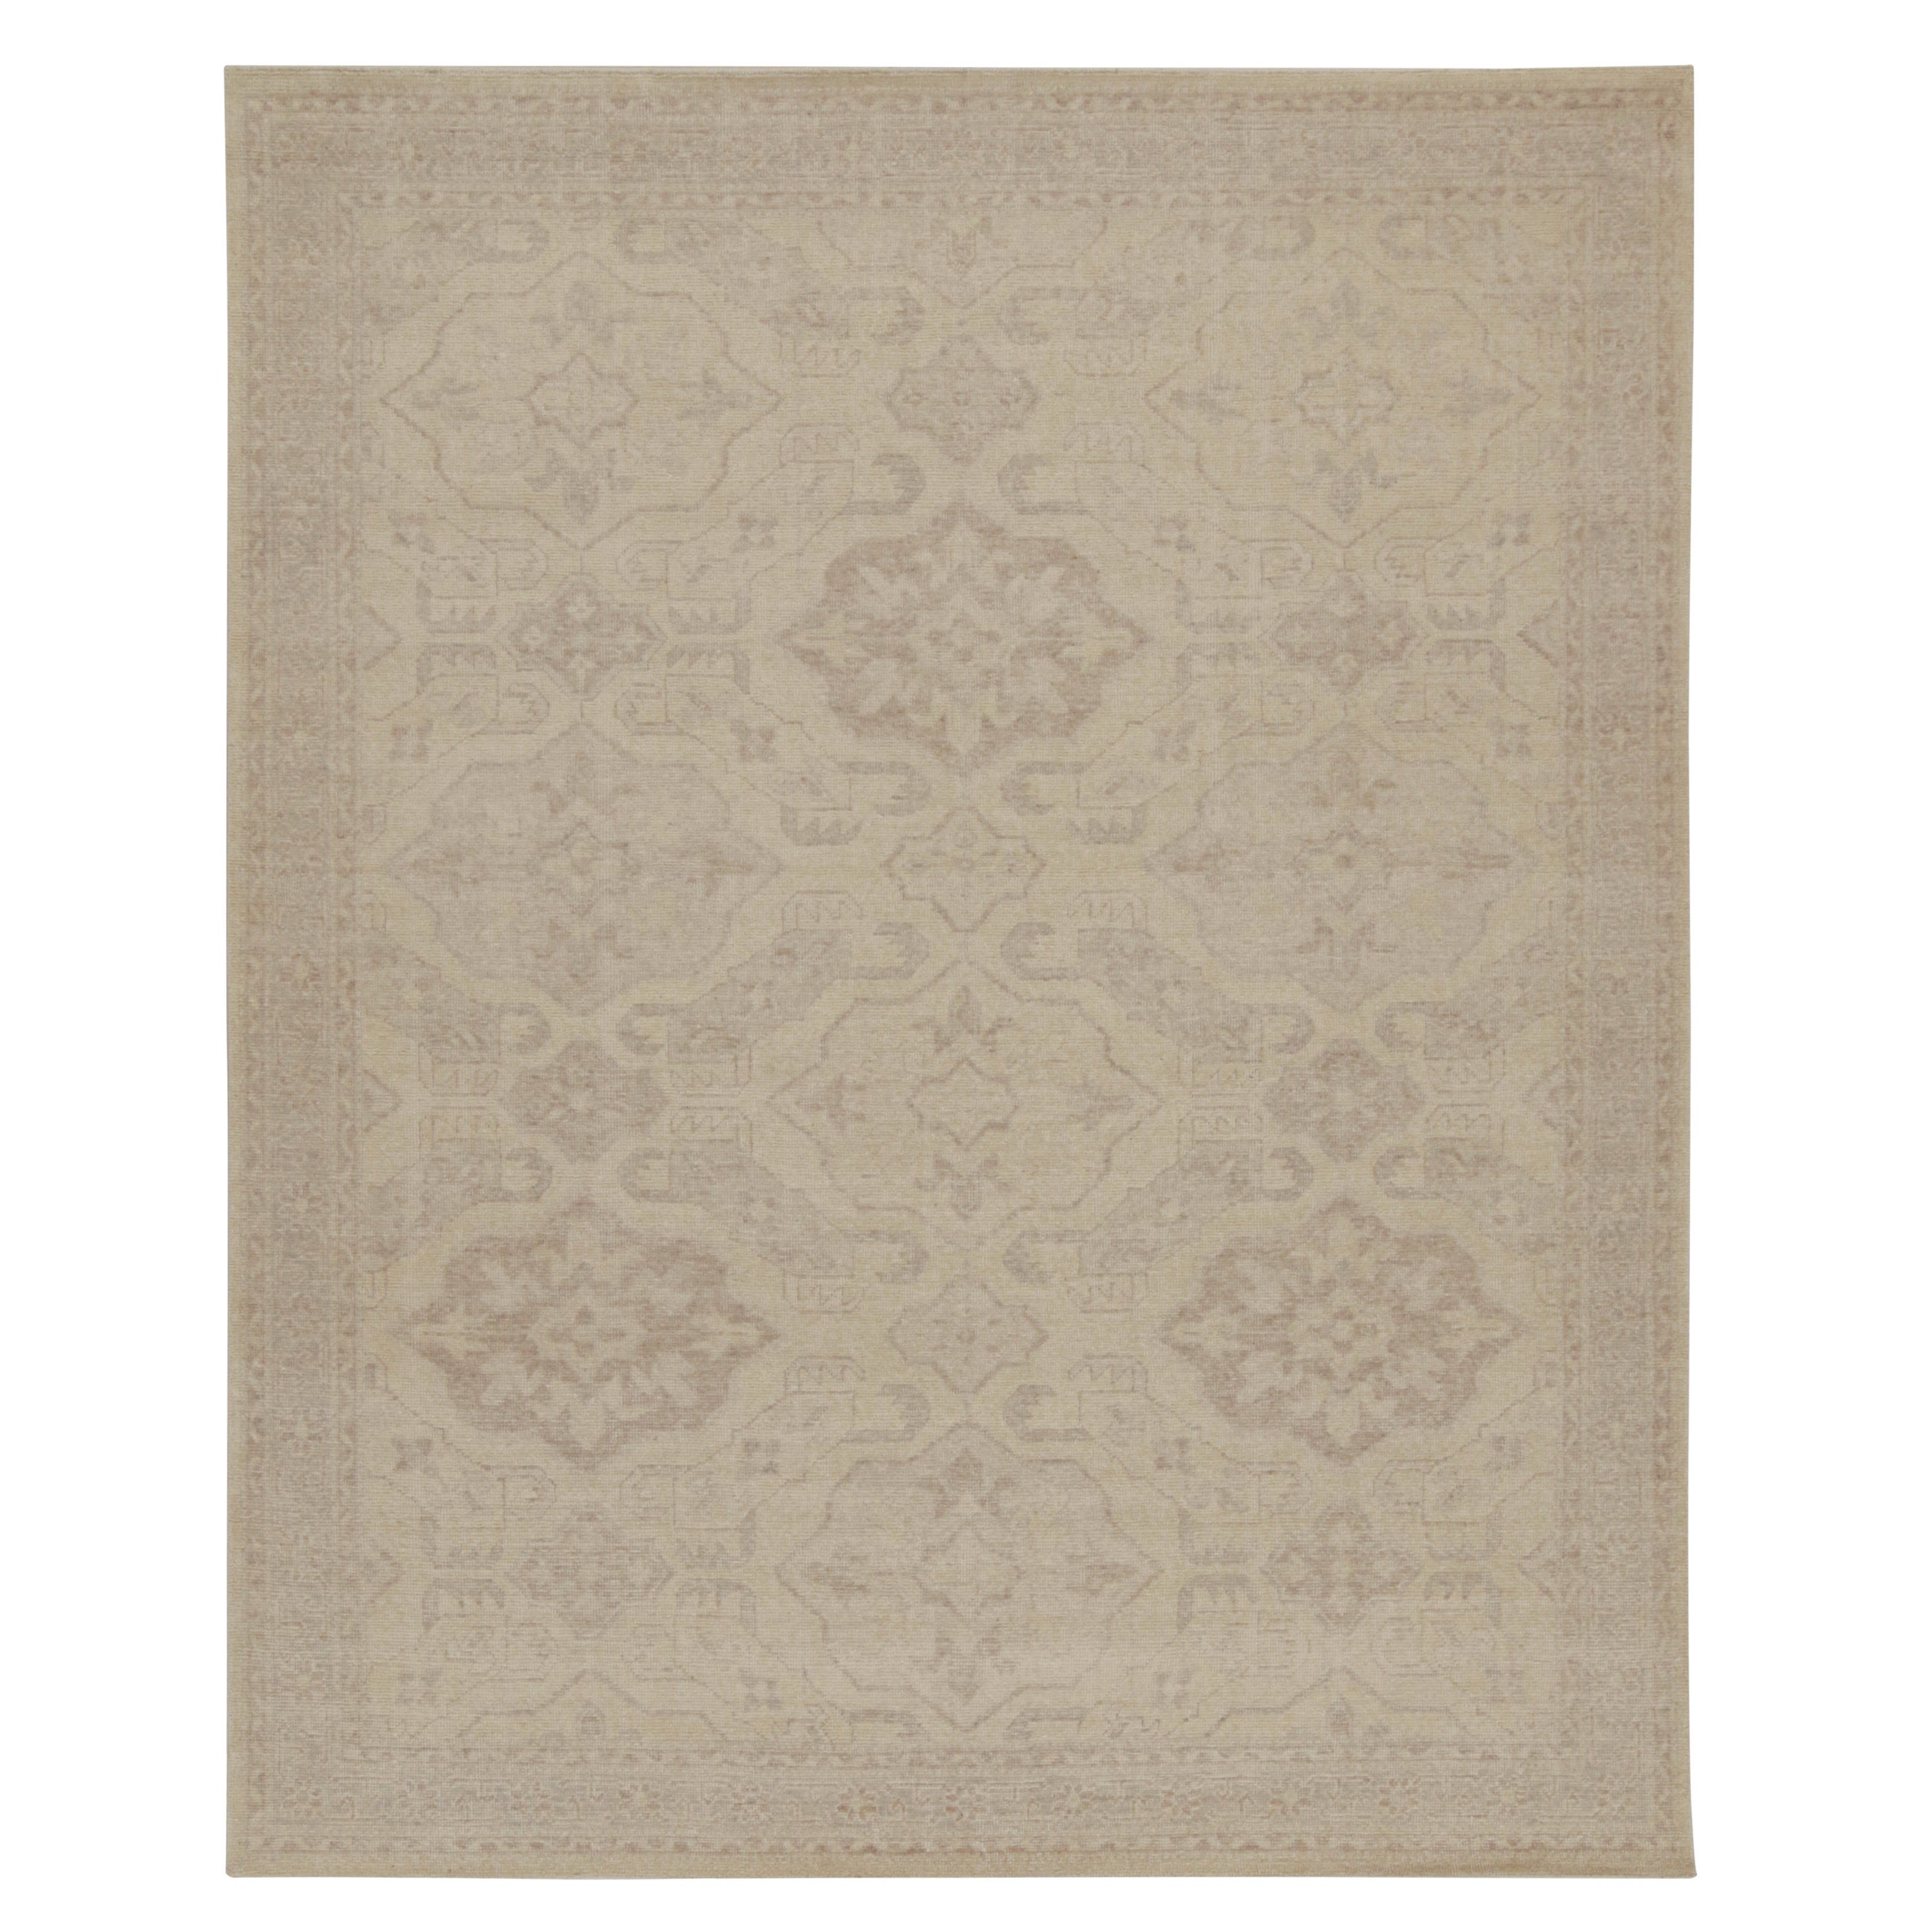 Rug & Kilim’s Distressed Tribal style rug in Beige and Gray Geometric Pattern